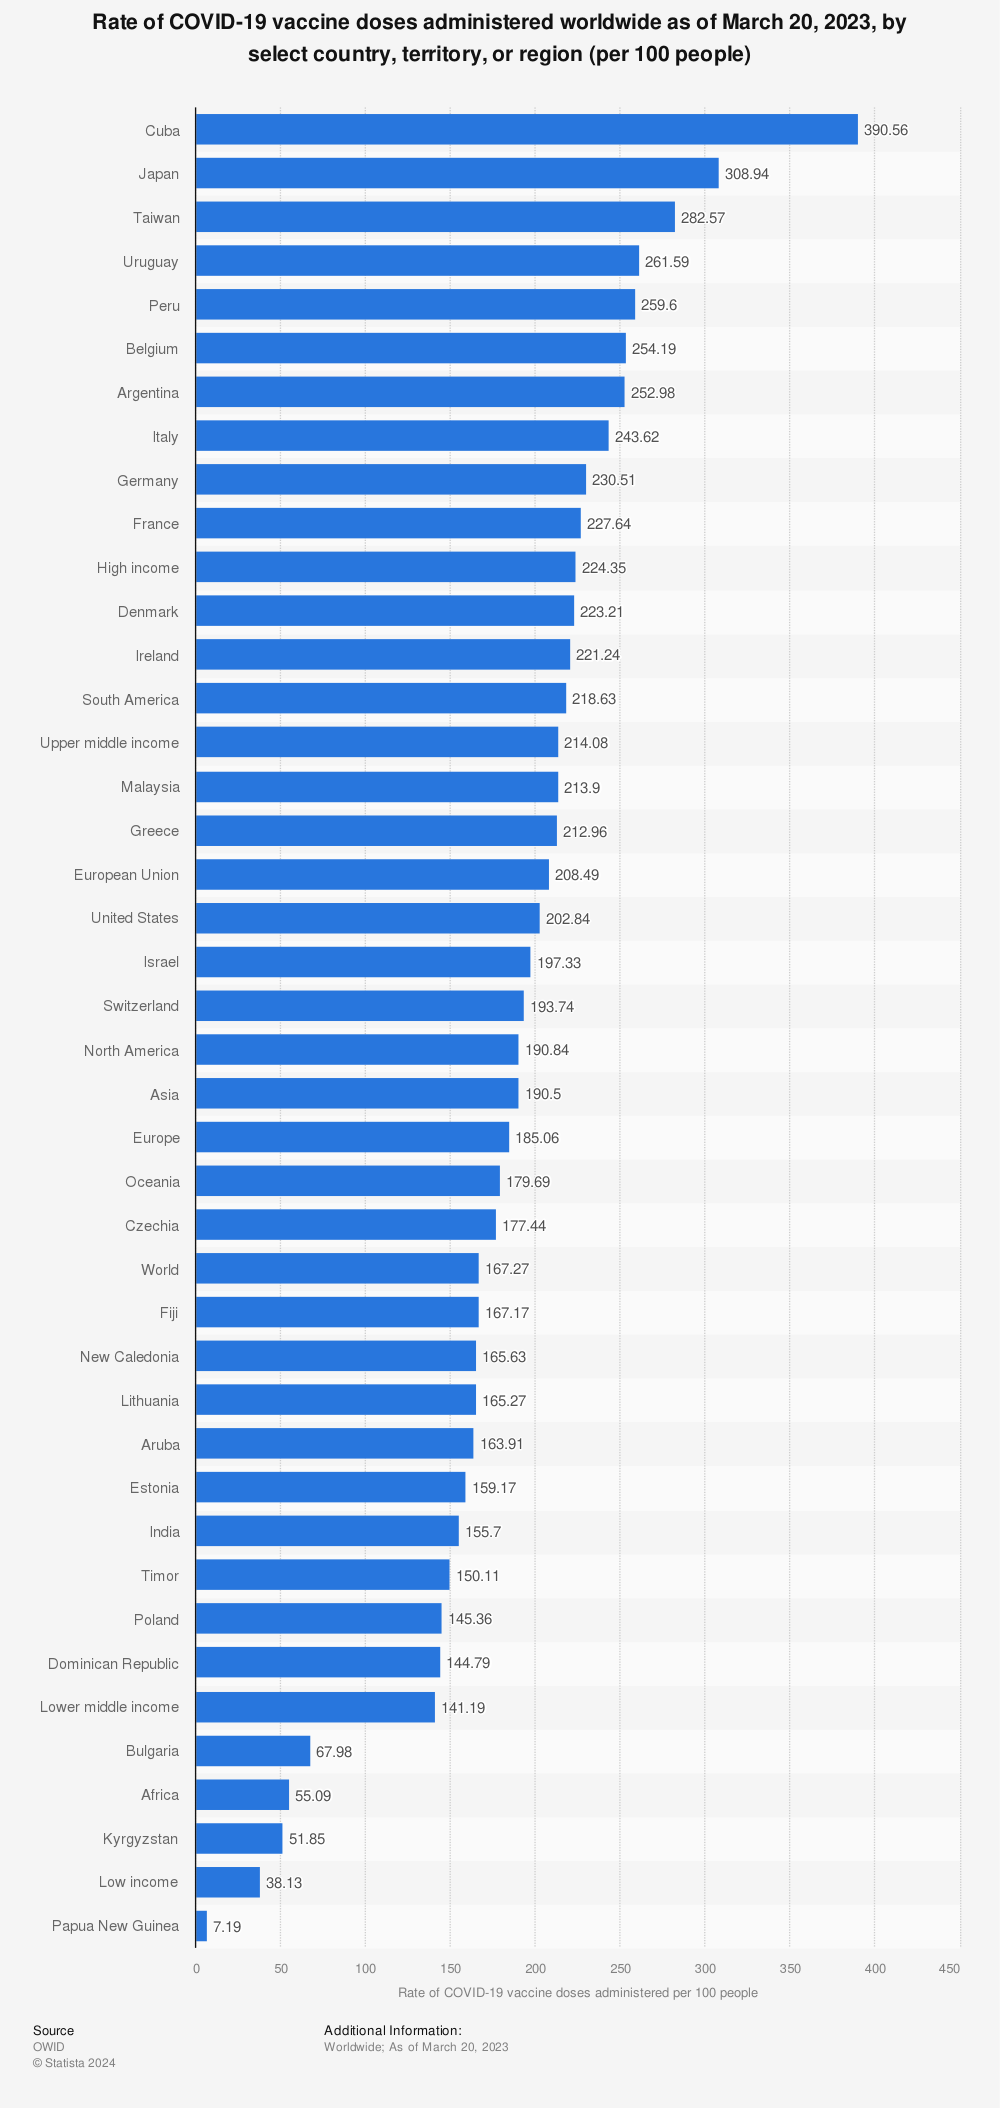 Statistic: Rate of COVID-19 vaccine doses administered worldwide as of January 17, 2022, by select country or territory (per 100 people) | Statista